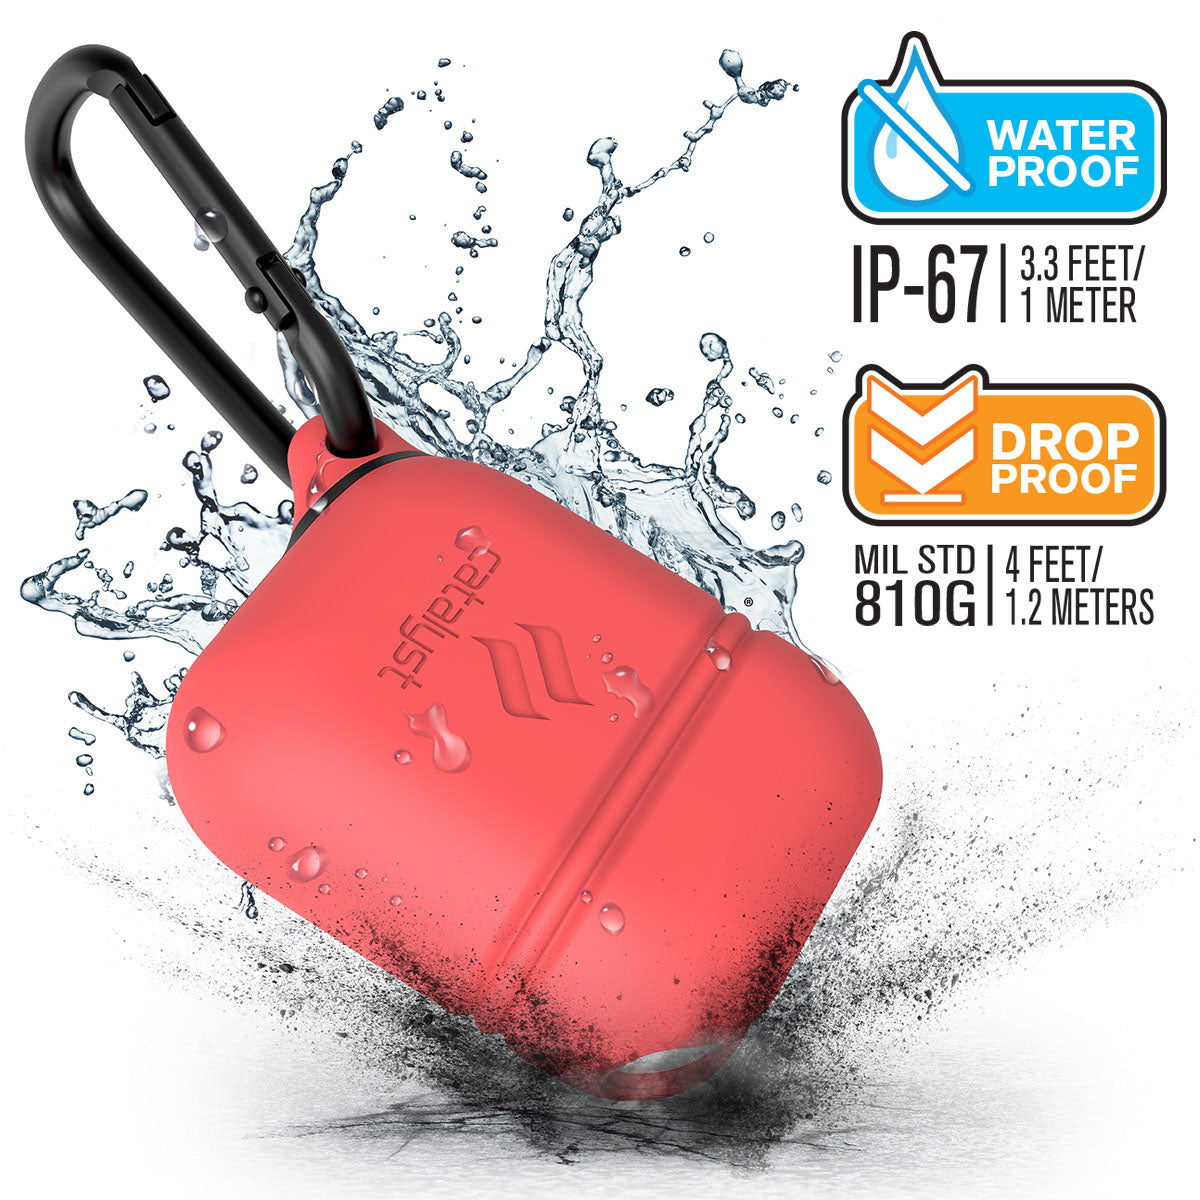 CATAPDCOR | Catalyst airpods gen2/1 waterproof case + carabiner showing the case drop proof and water proof features with attached carabiner in coral text reads water proof IP-67 3.3 FEET/1 METER DROP PROOF MIL STD 810G 1.2 METERS